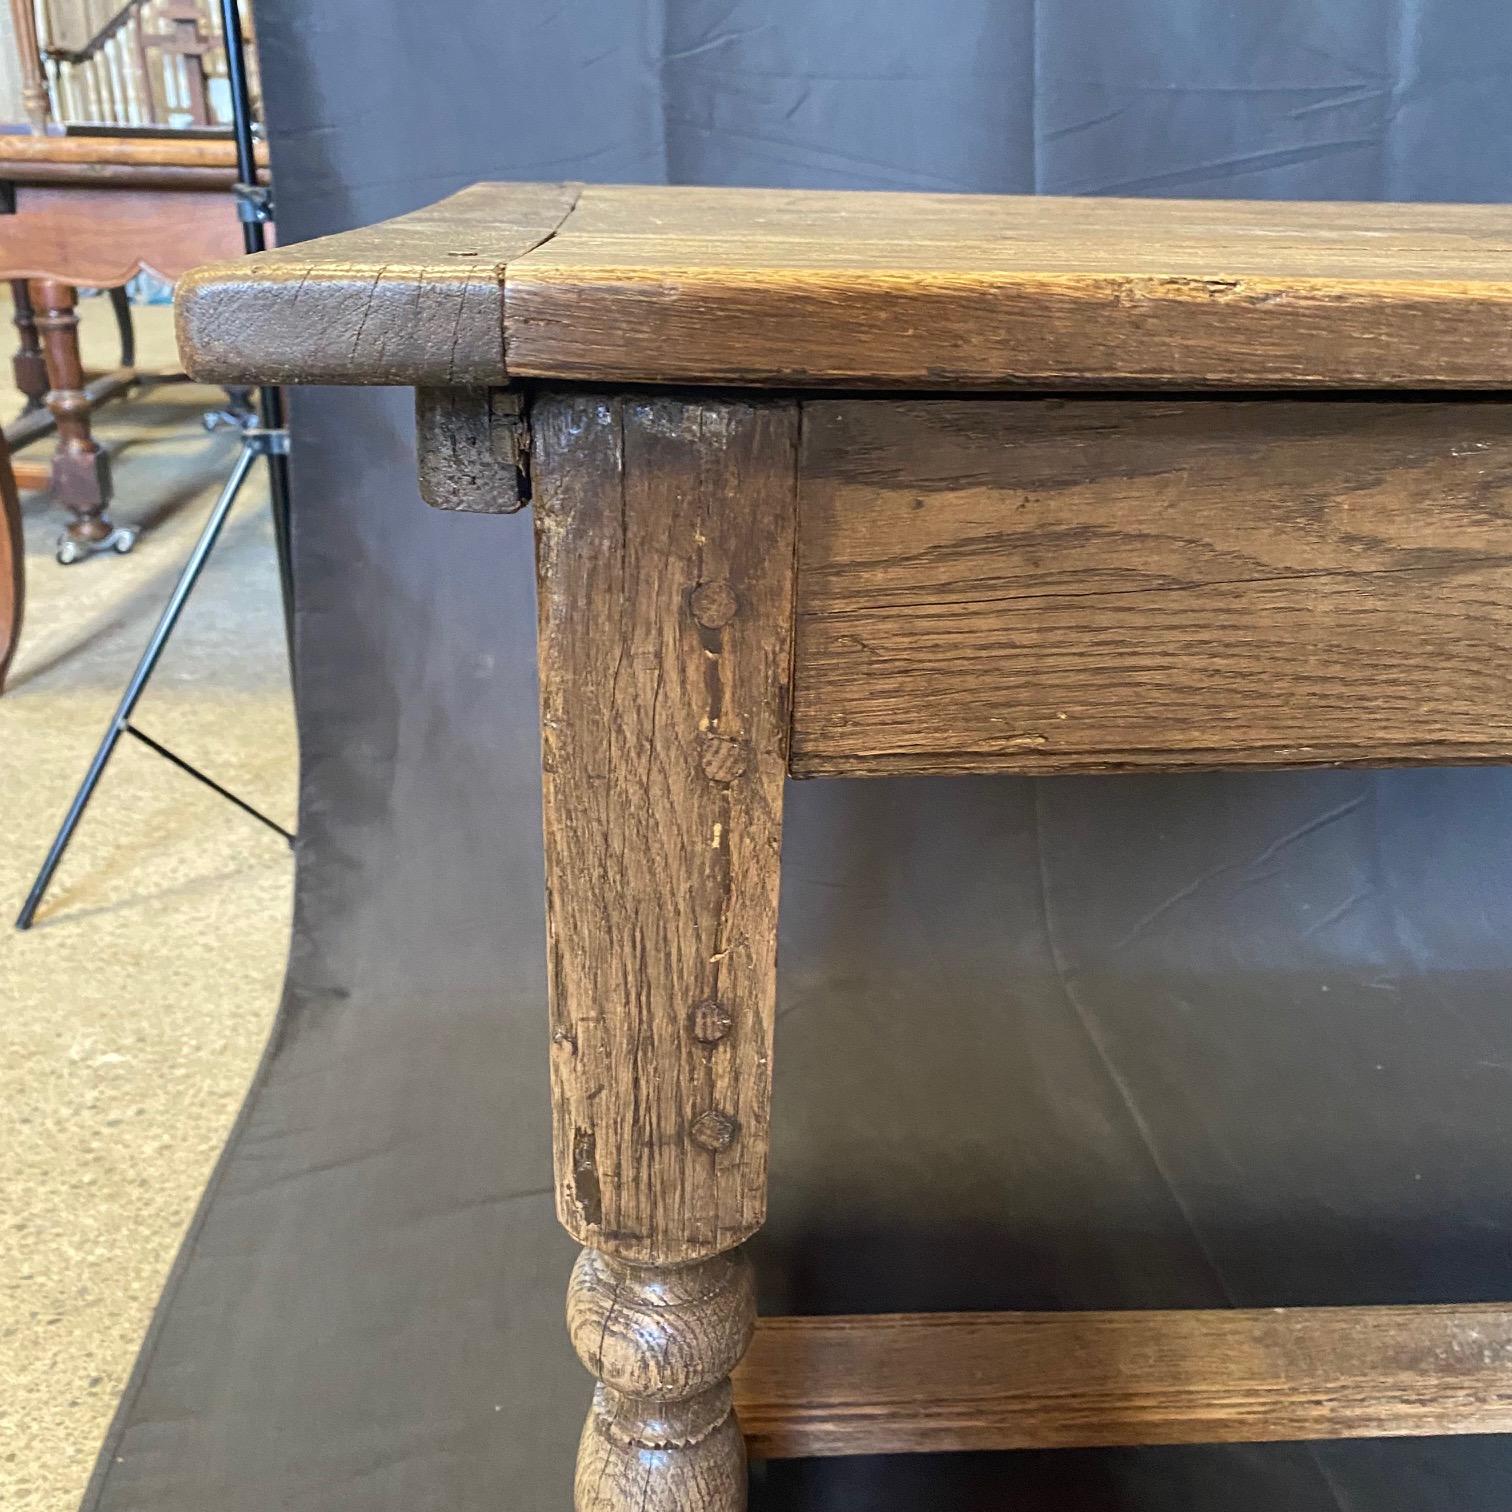 A rare find in this 19th century French oak farmhouse refectory table. A very architecturally pleasing design raised on hand turned legs united by a central stretcher. Displaying a really beautiful and rich patina throughout. The top slides over to